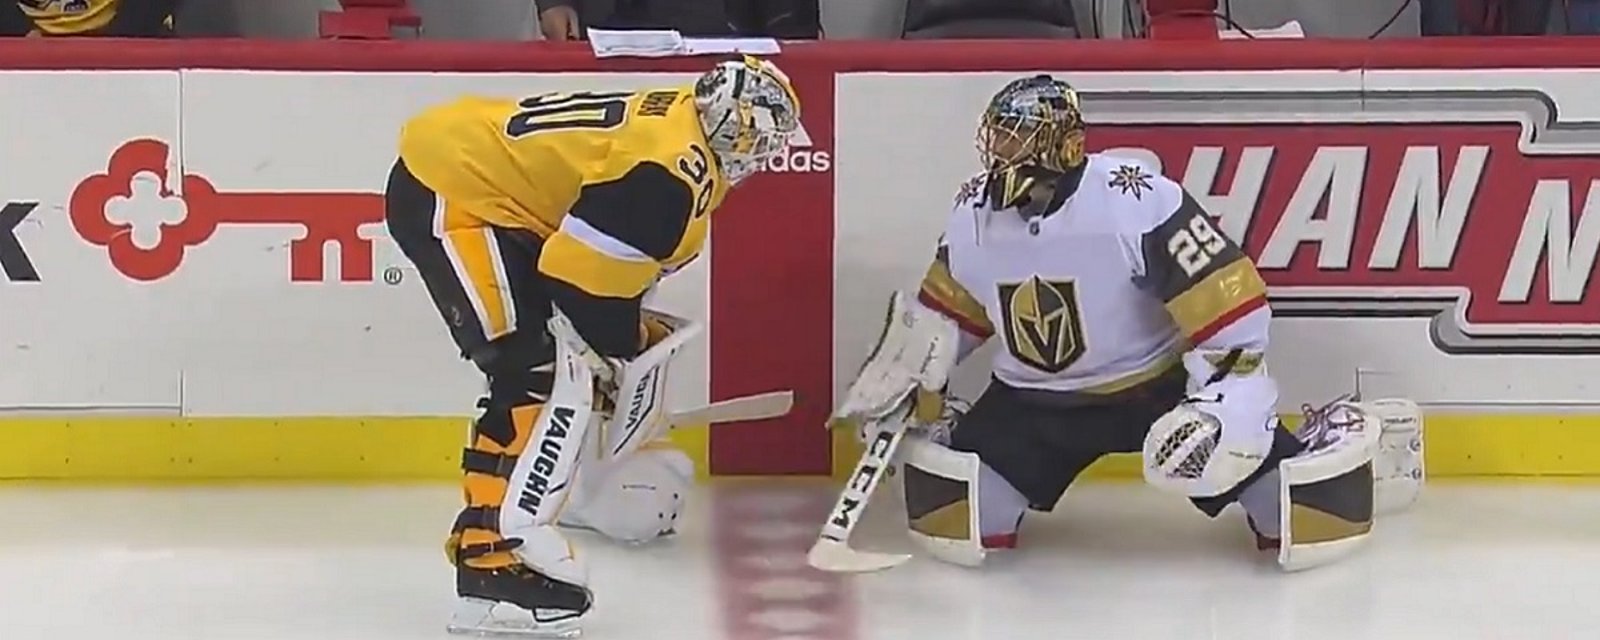 Marc Andre Fleury shares a special moment before the game with several former teammates.